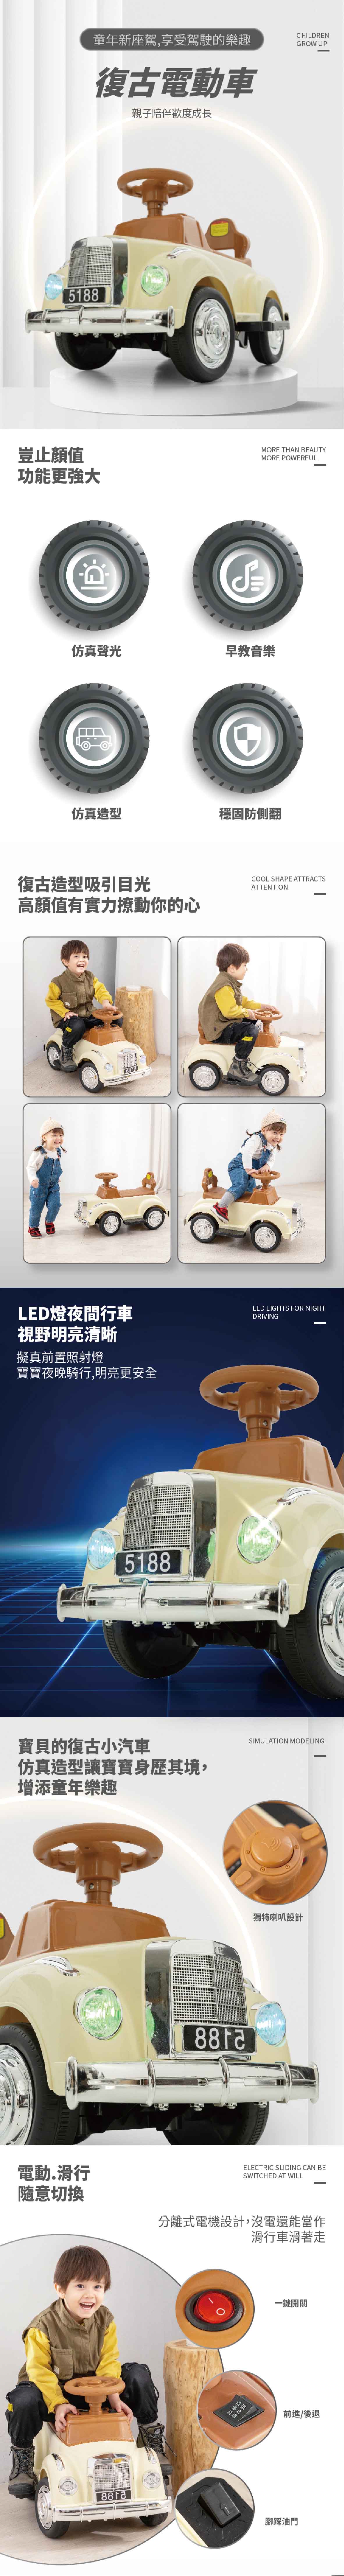 proimages/product/00026057_Edgar聲光經典復古電動車-02.jpg